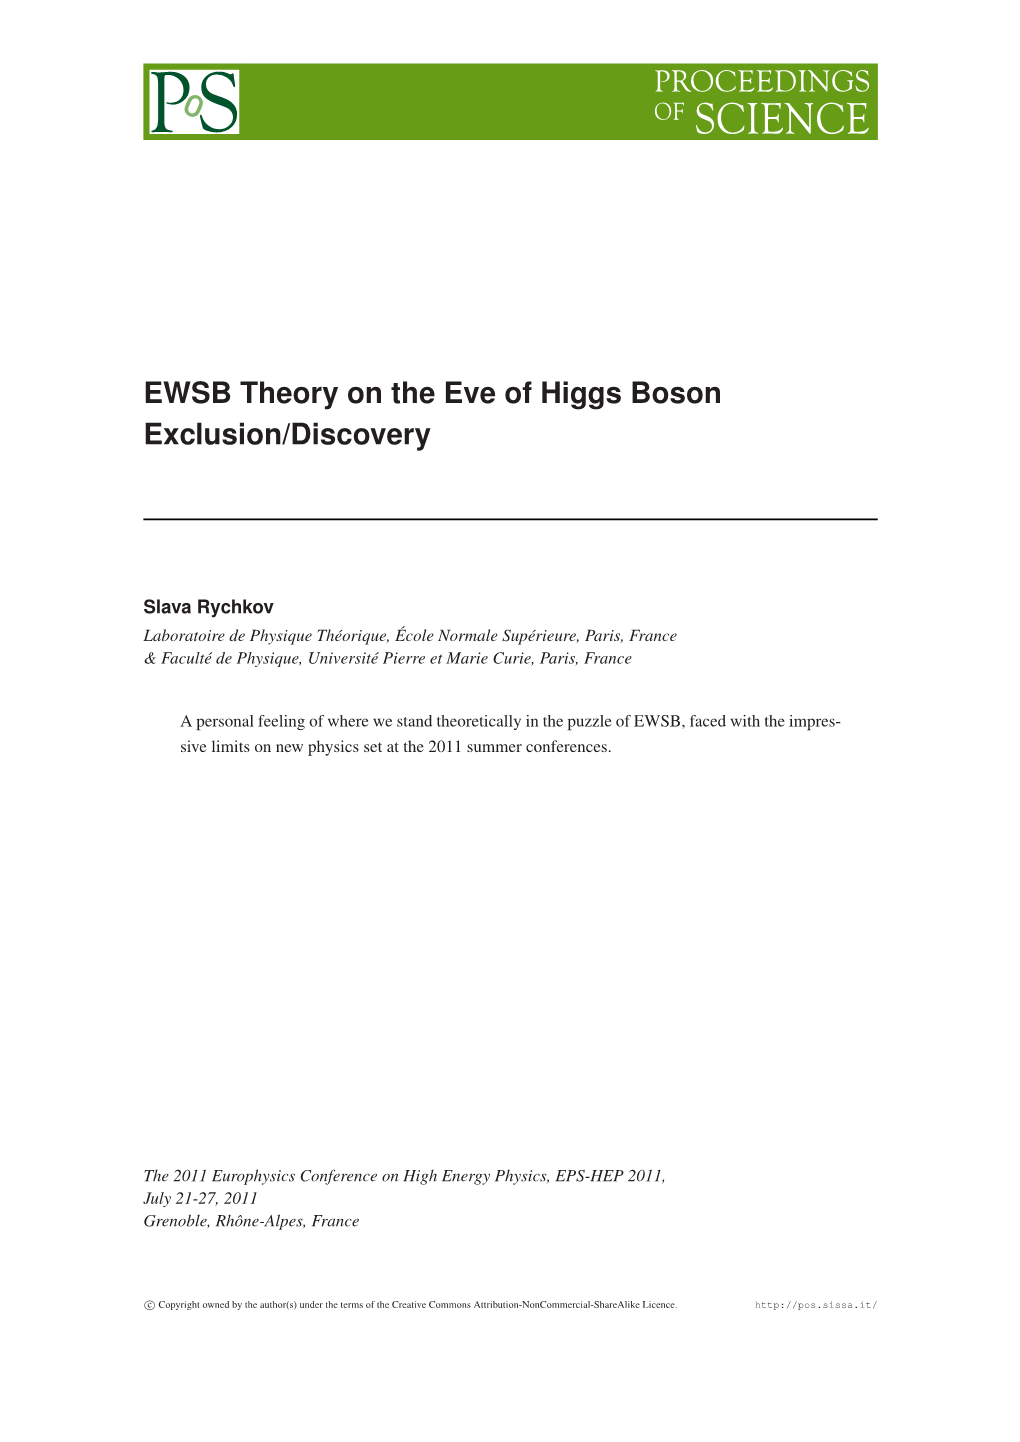 EWSB Theory on the Eve of Higgs Boson Exclusion/Discovery